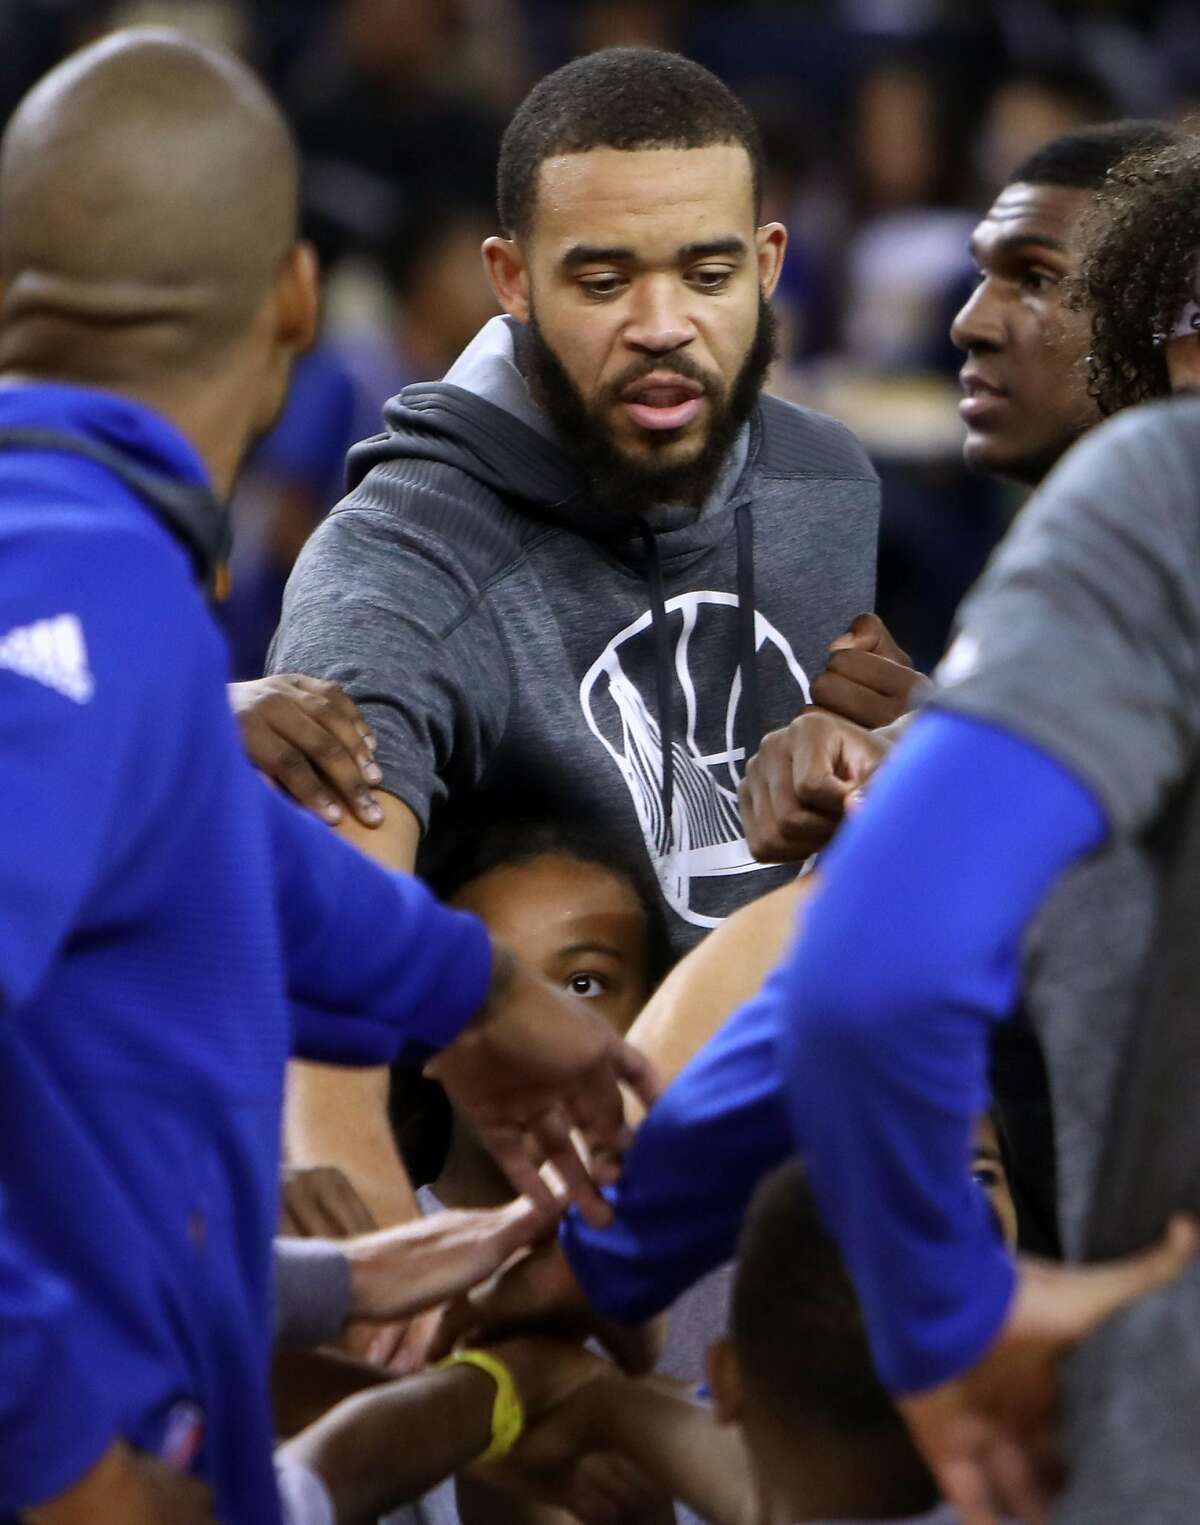 JaVale McGee will reportedly return to Warriors, continuing champs' big  summer 